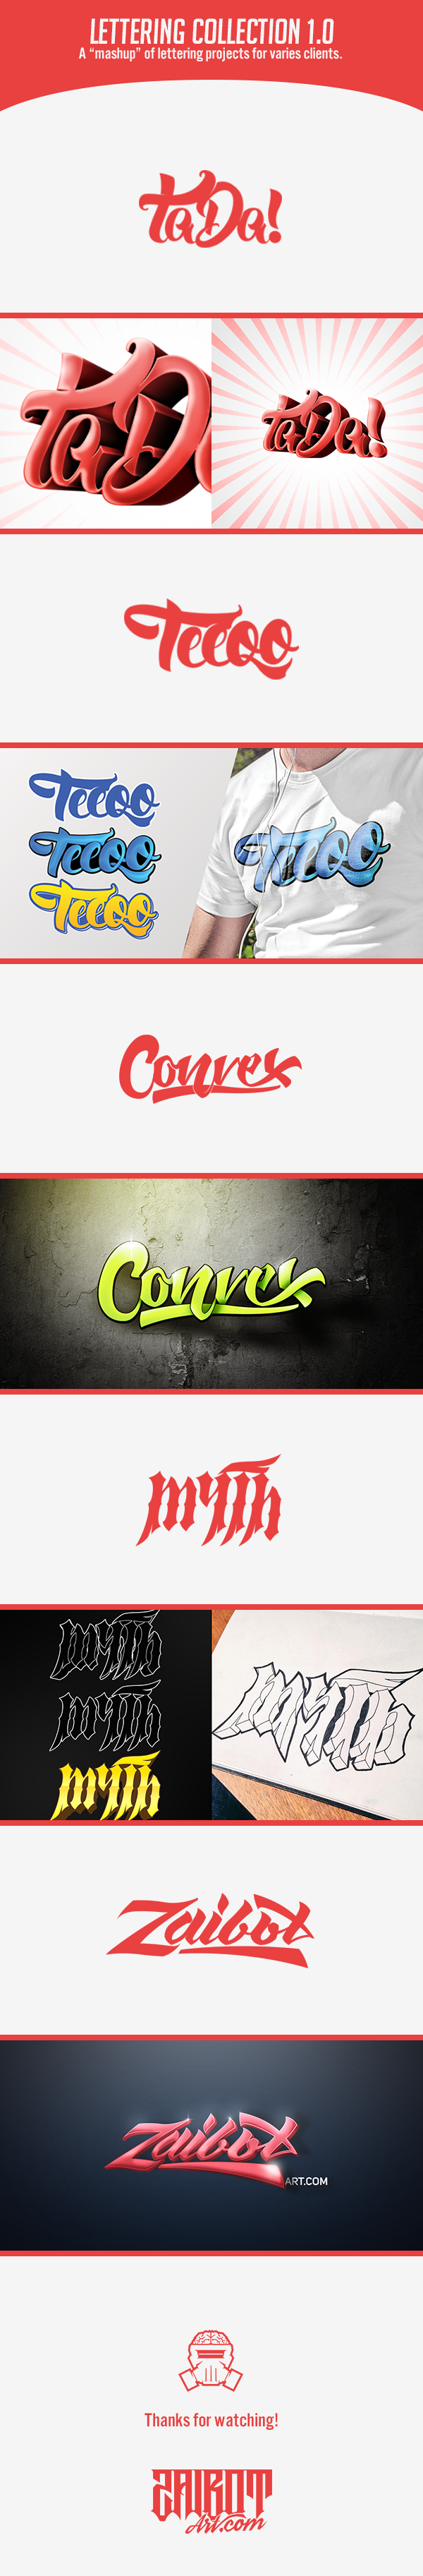 lettering Custom lettering collection